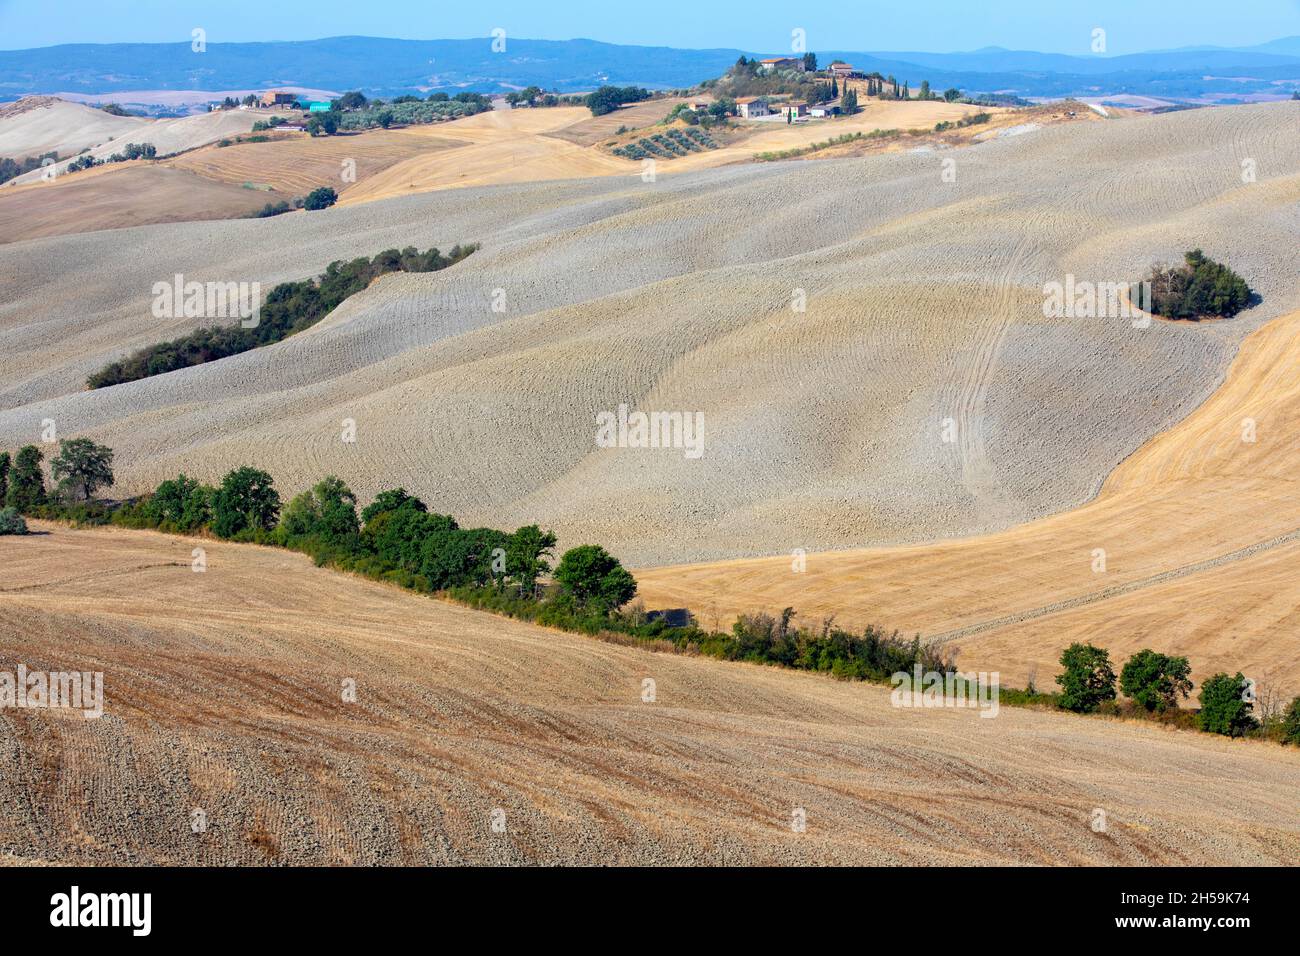 Typical landscape in val d' Orcia, Tuscany, Italy Stock Photo